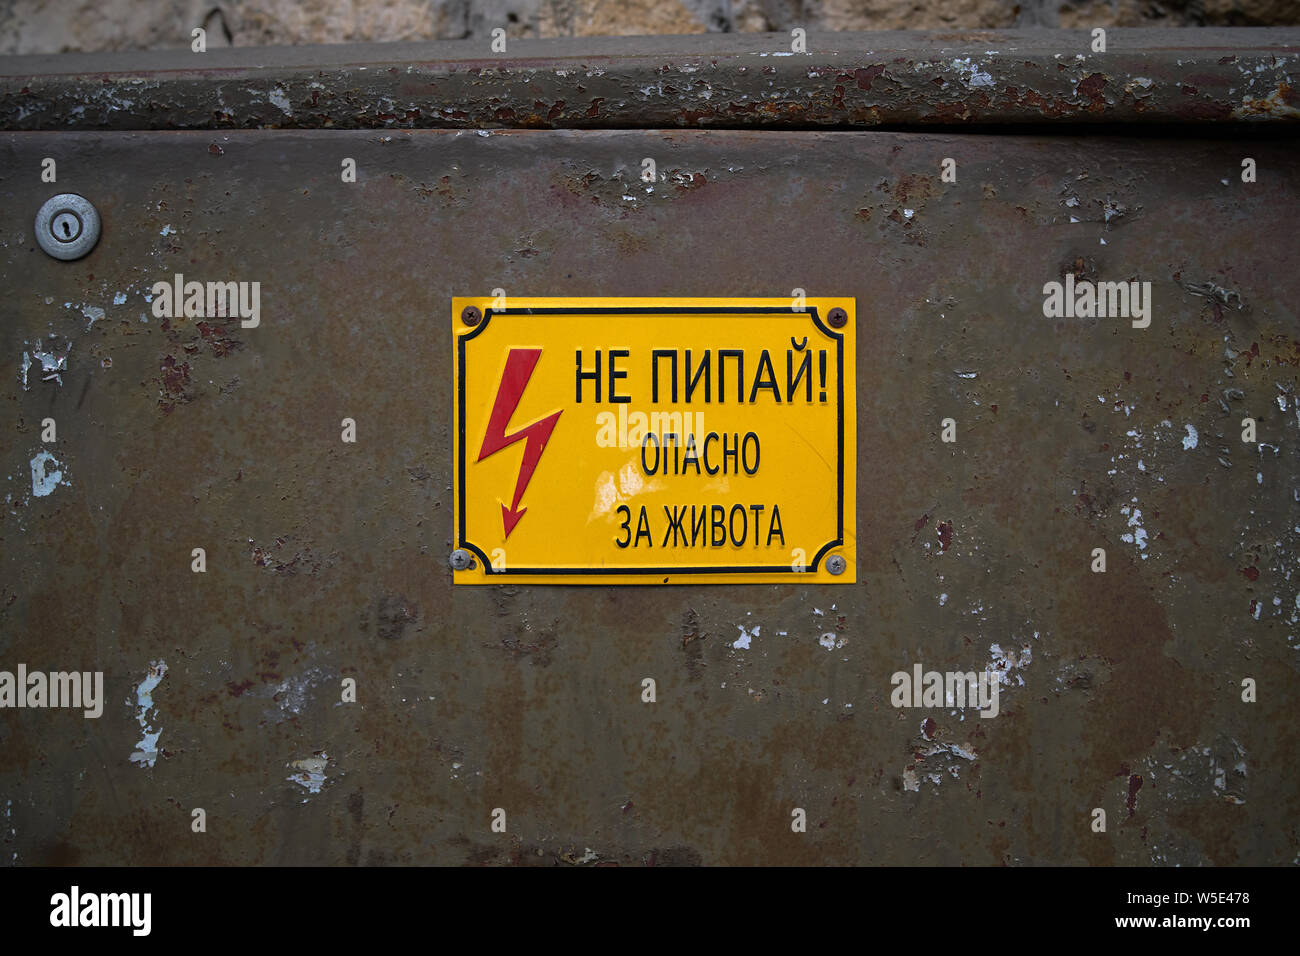 Warning sign (Bulgarian, Cyrillic): 'Do not touch! Danger to life!' Stock Photo